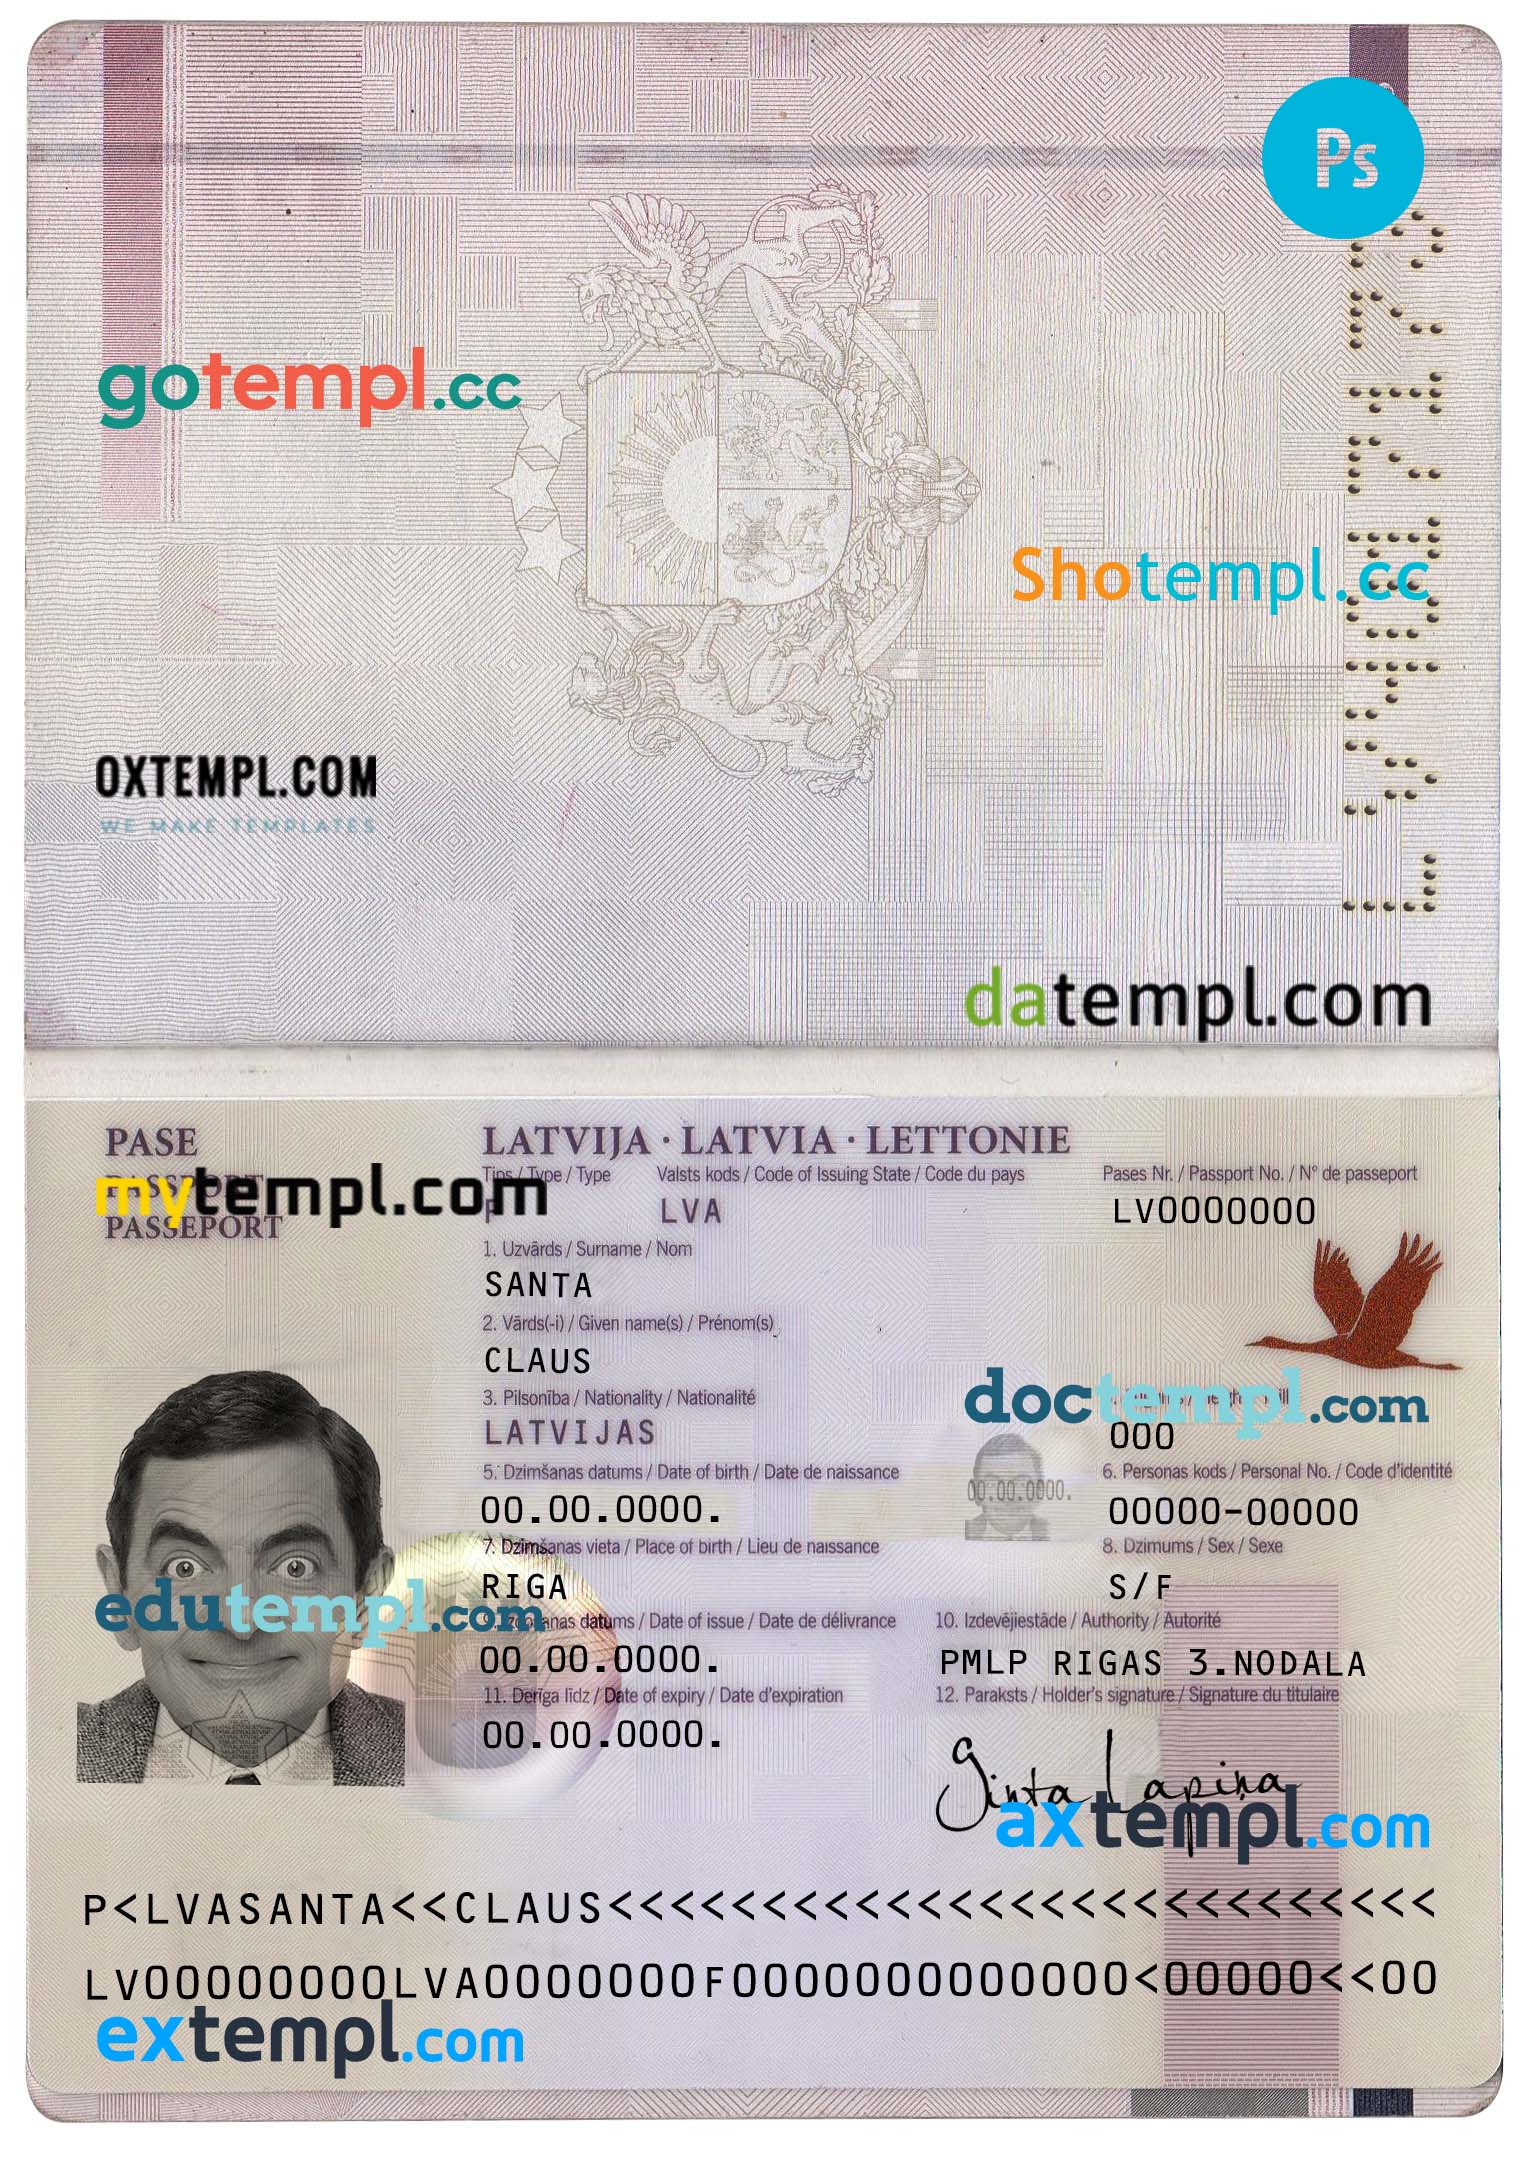 Latvia passport PSD files, editable scan and photo-realistic look sample (2007 - 2015), 2 in 1